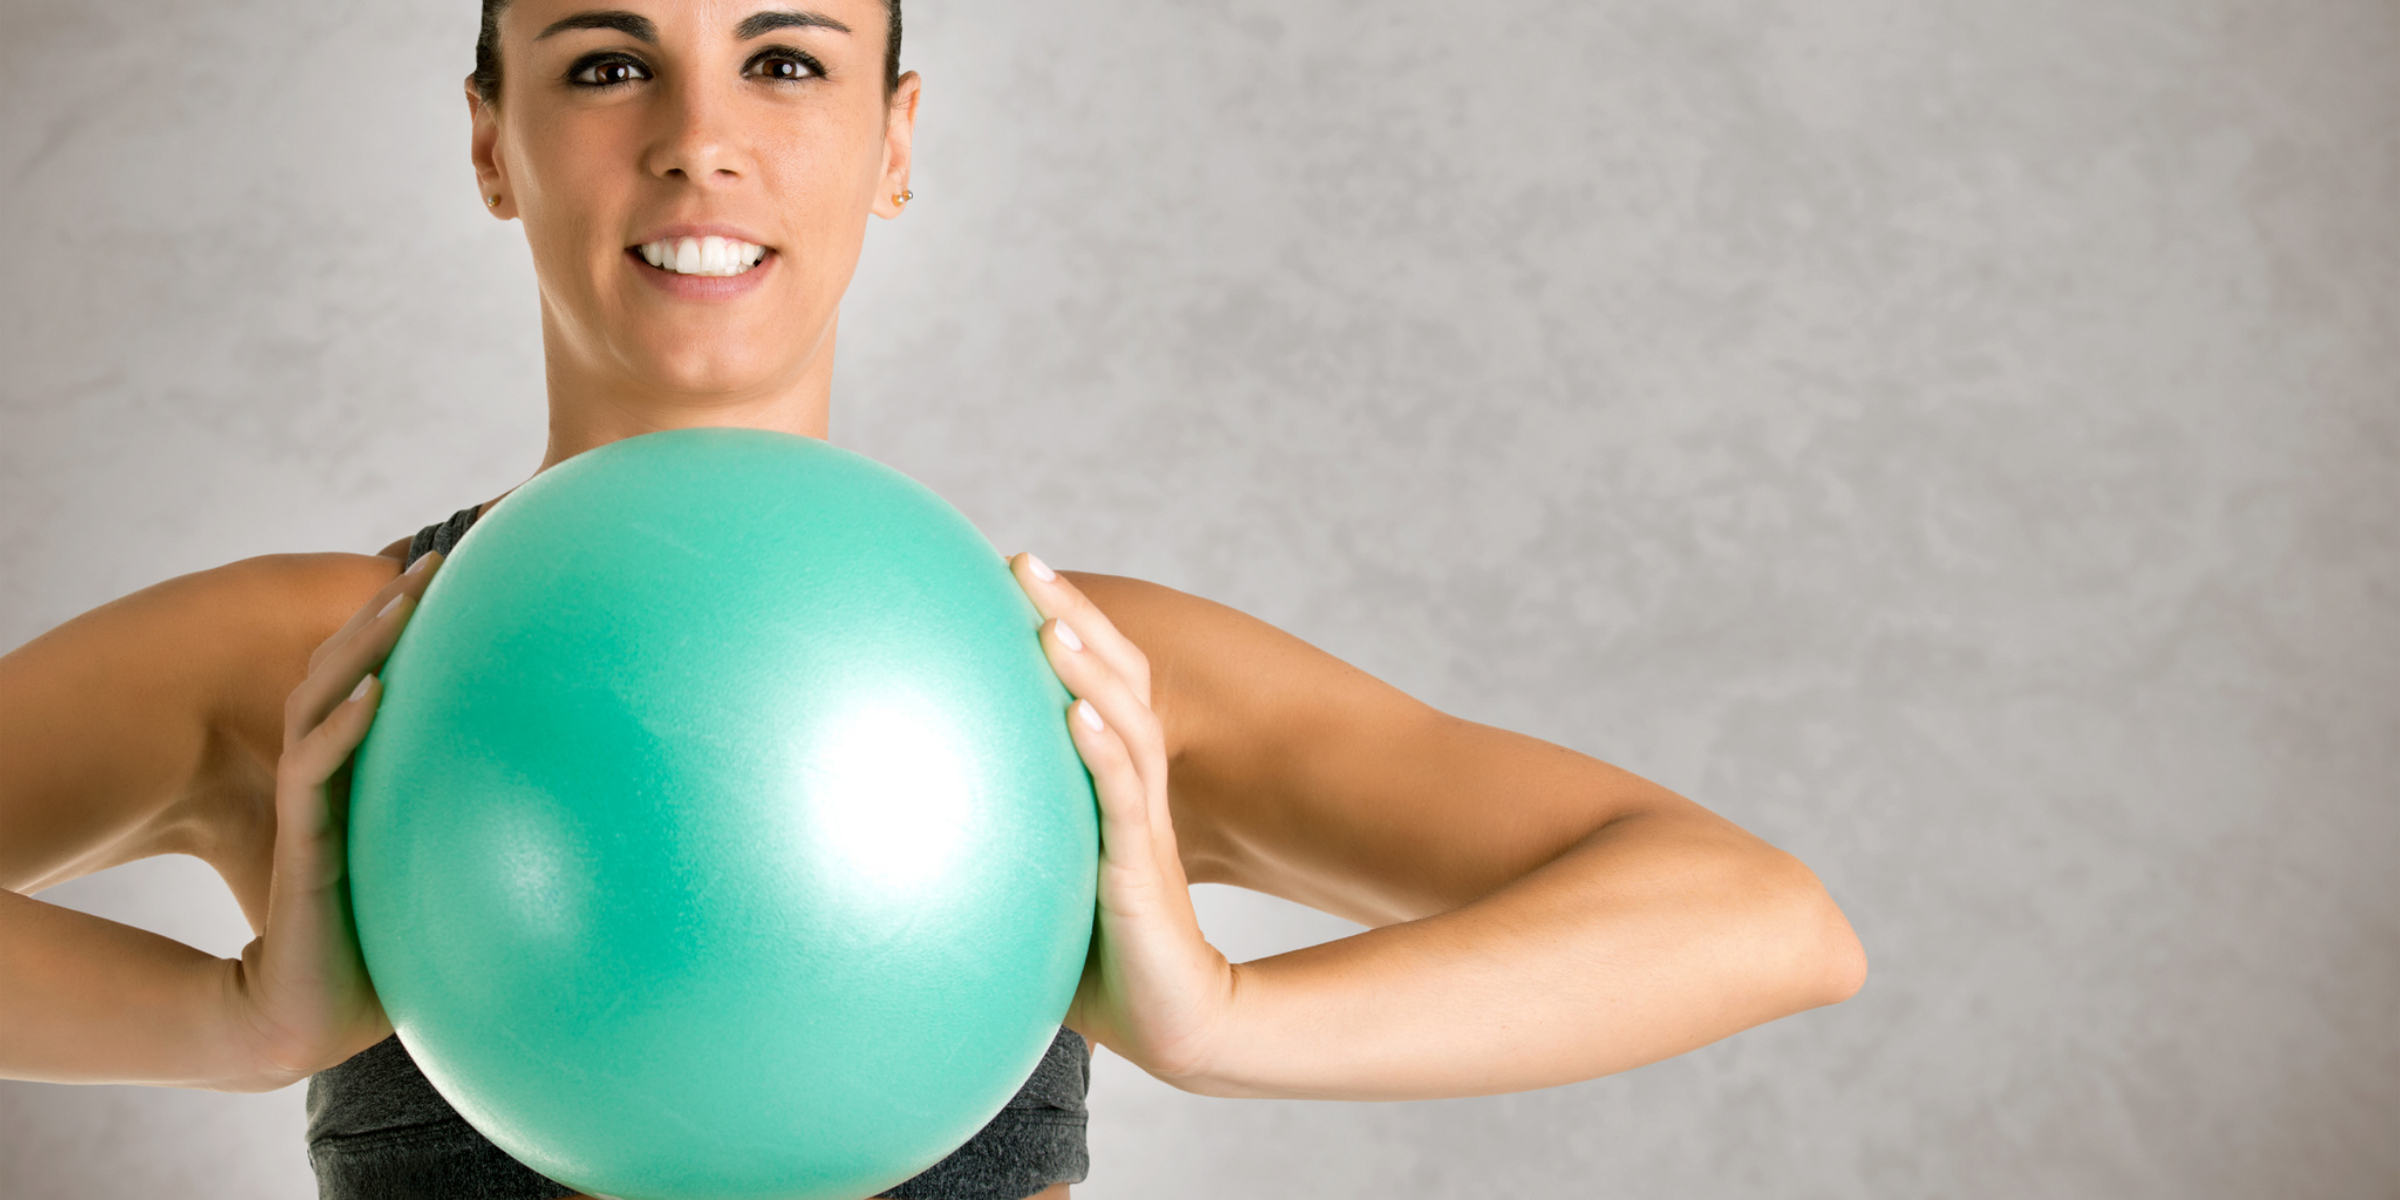 A woman holding a green exercise ball.